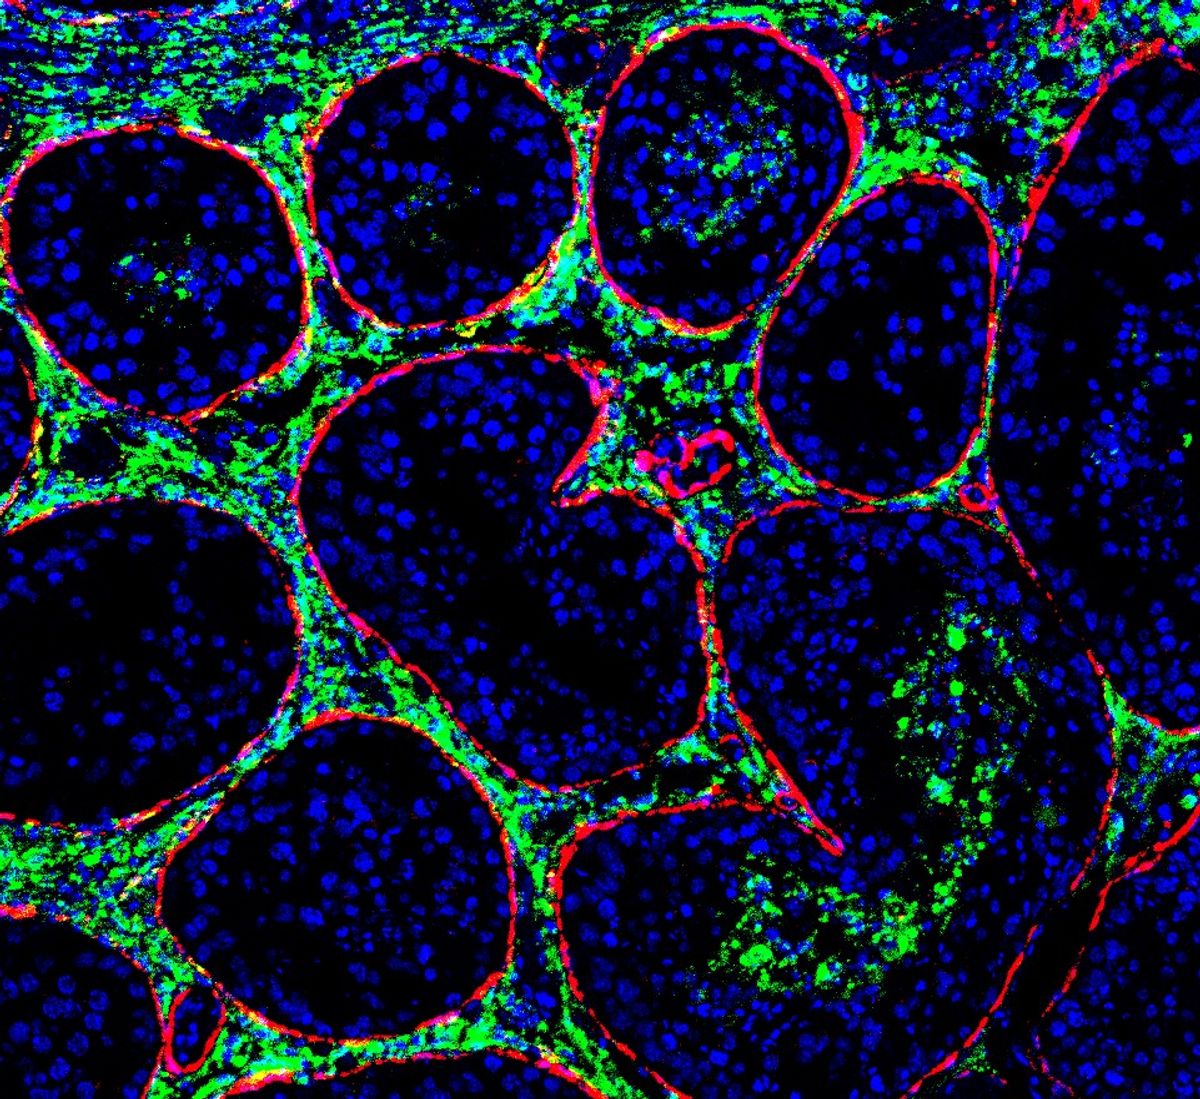 Immunofluorescence staining demonstrates that monkeypox virus (green) can be detected in the somniferous tubules (red), the sites of sperm maturation and storage, of a crab-eating macaque with acute monkeypox infection.